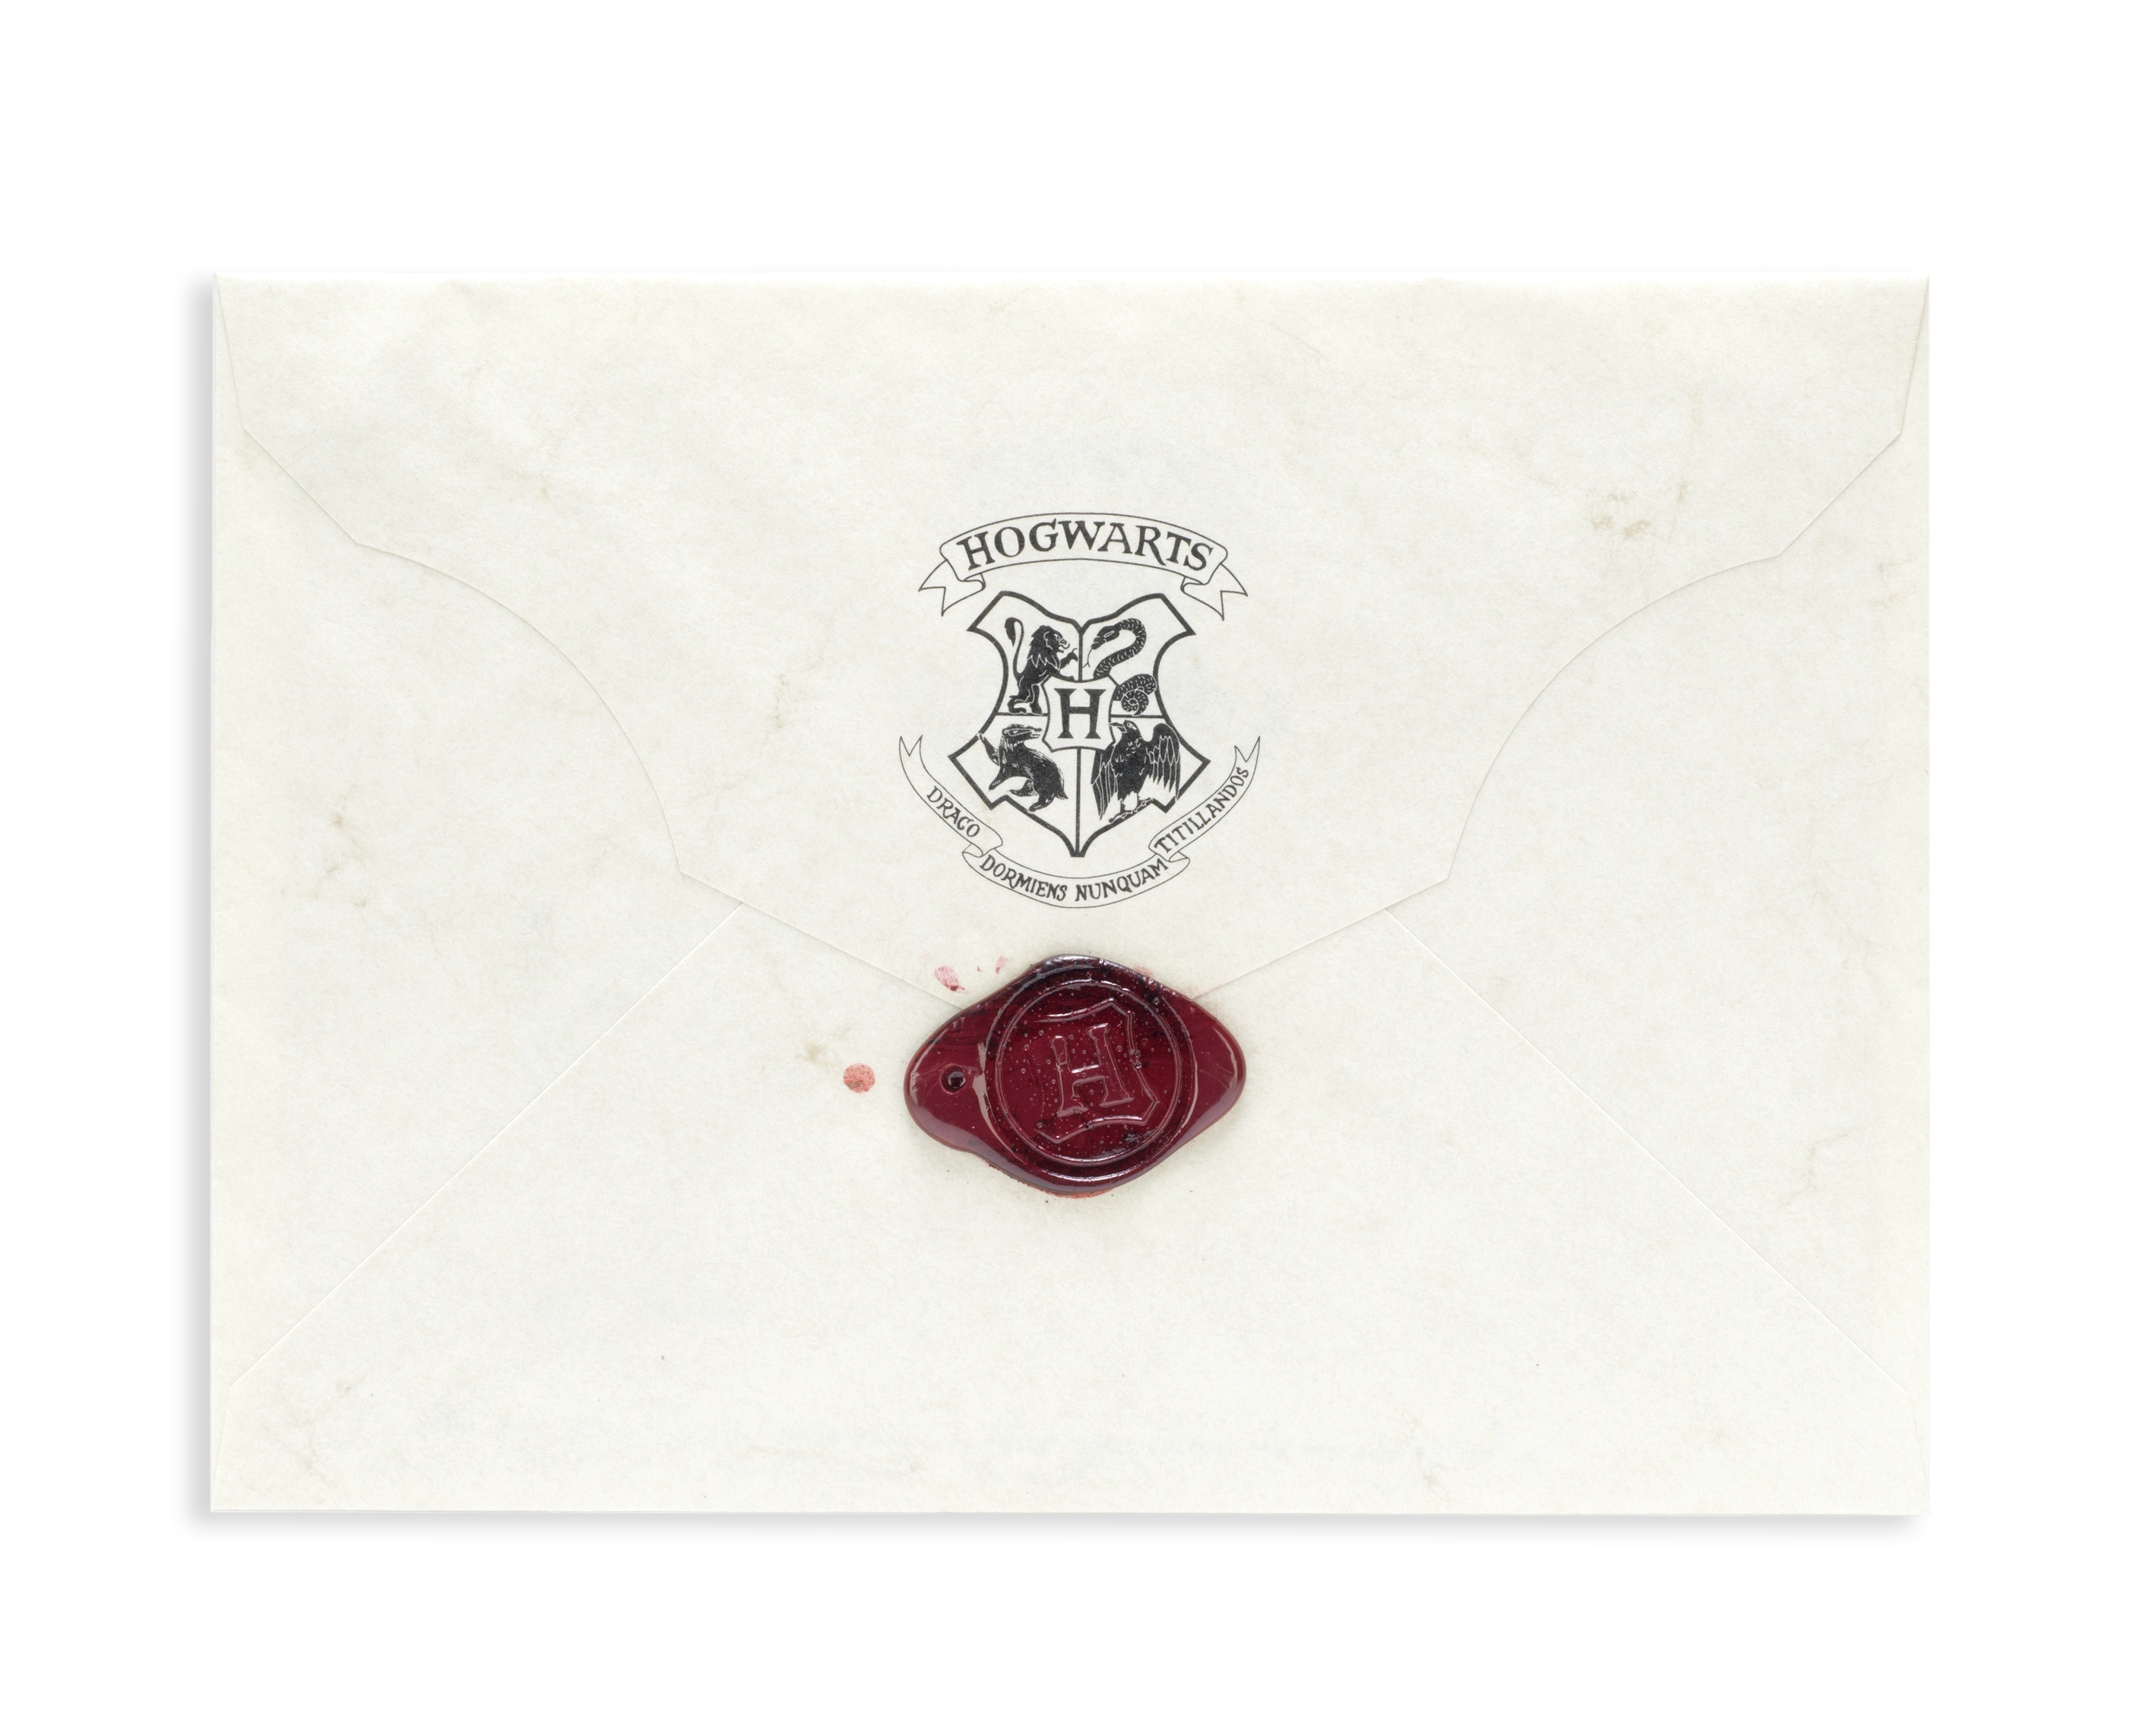 Harry Potter: A Hogwarts acceptance letter with envelope from The Philosopher's Stone, Warner Bro... - Image 2 of 3